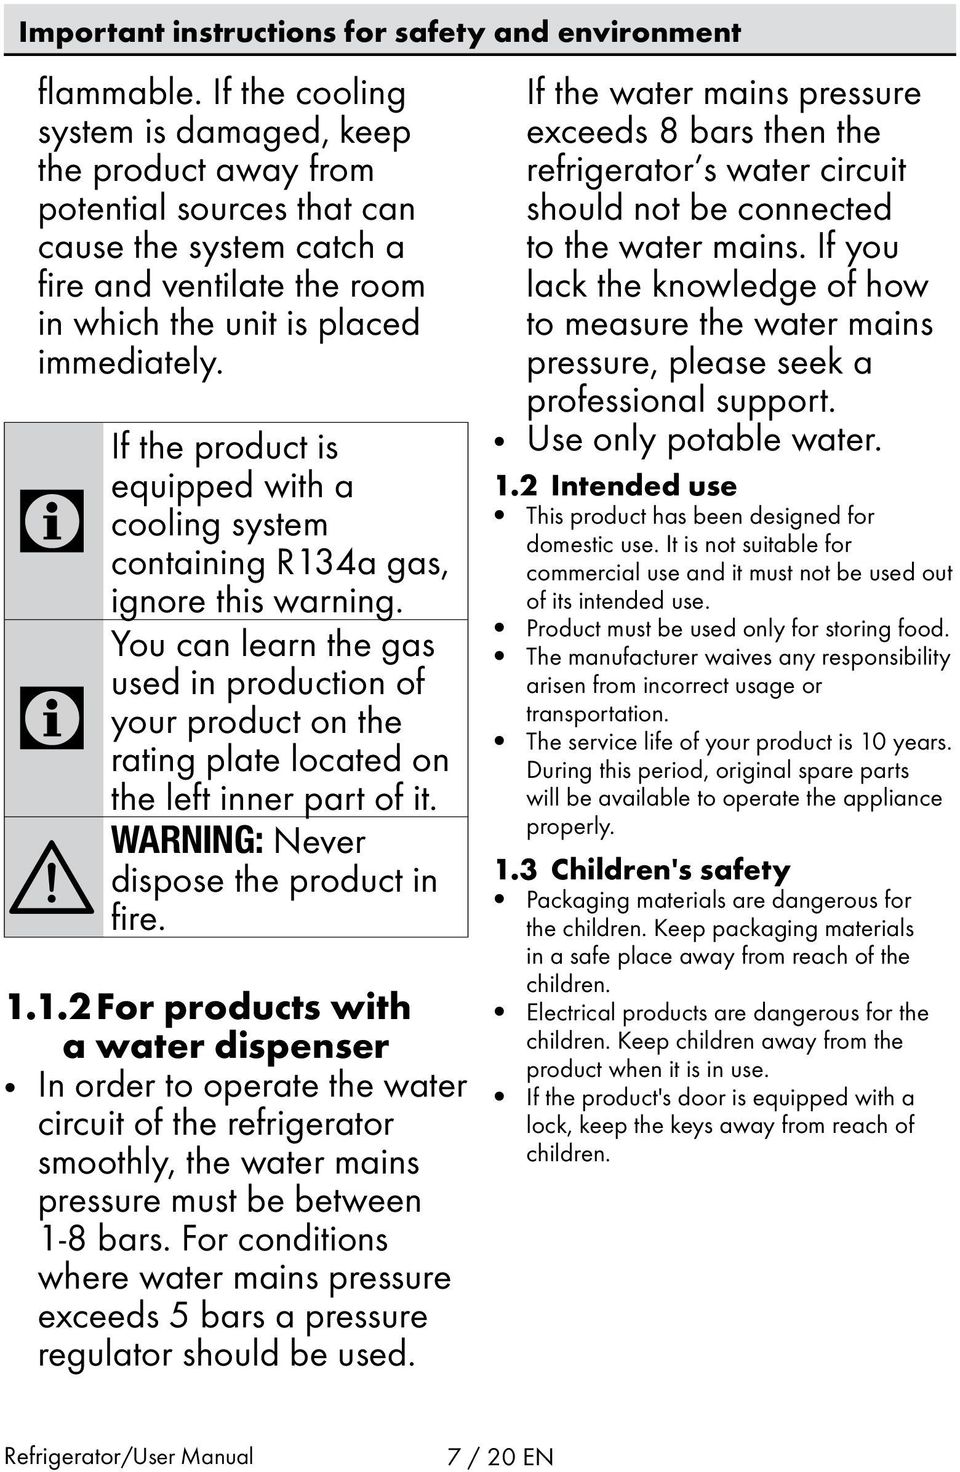 C C A WARNING: If the product is equipped with a cooling system containing R134a gas, ignore this warning.